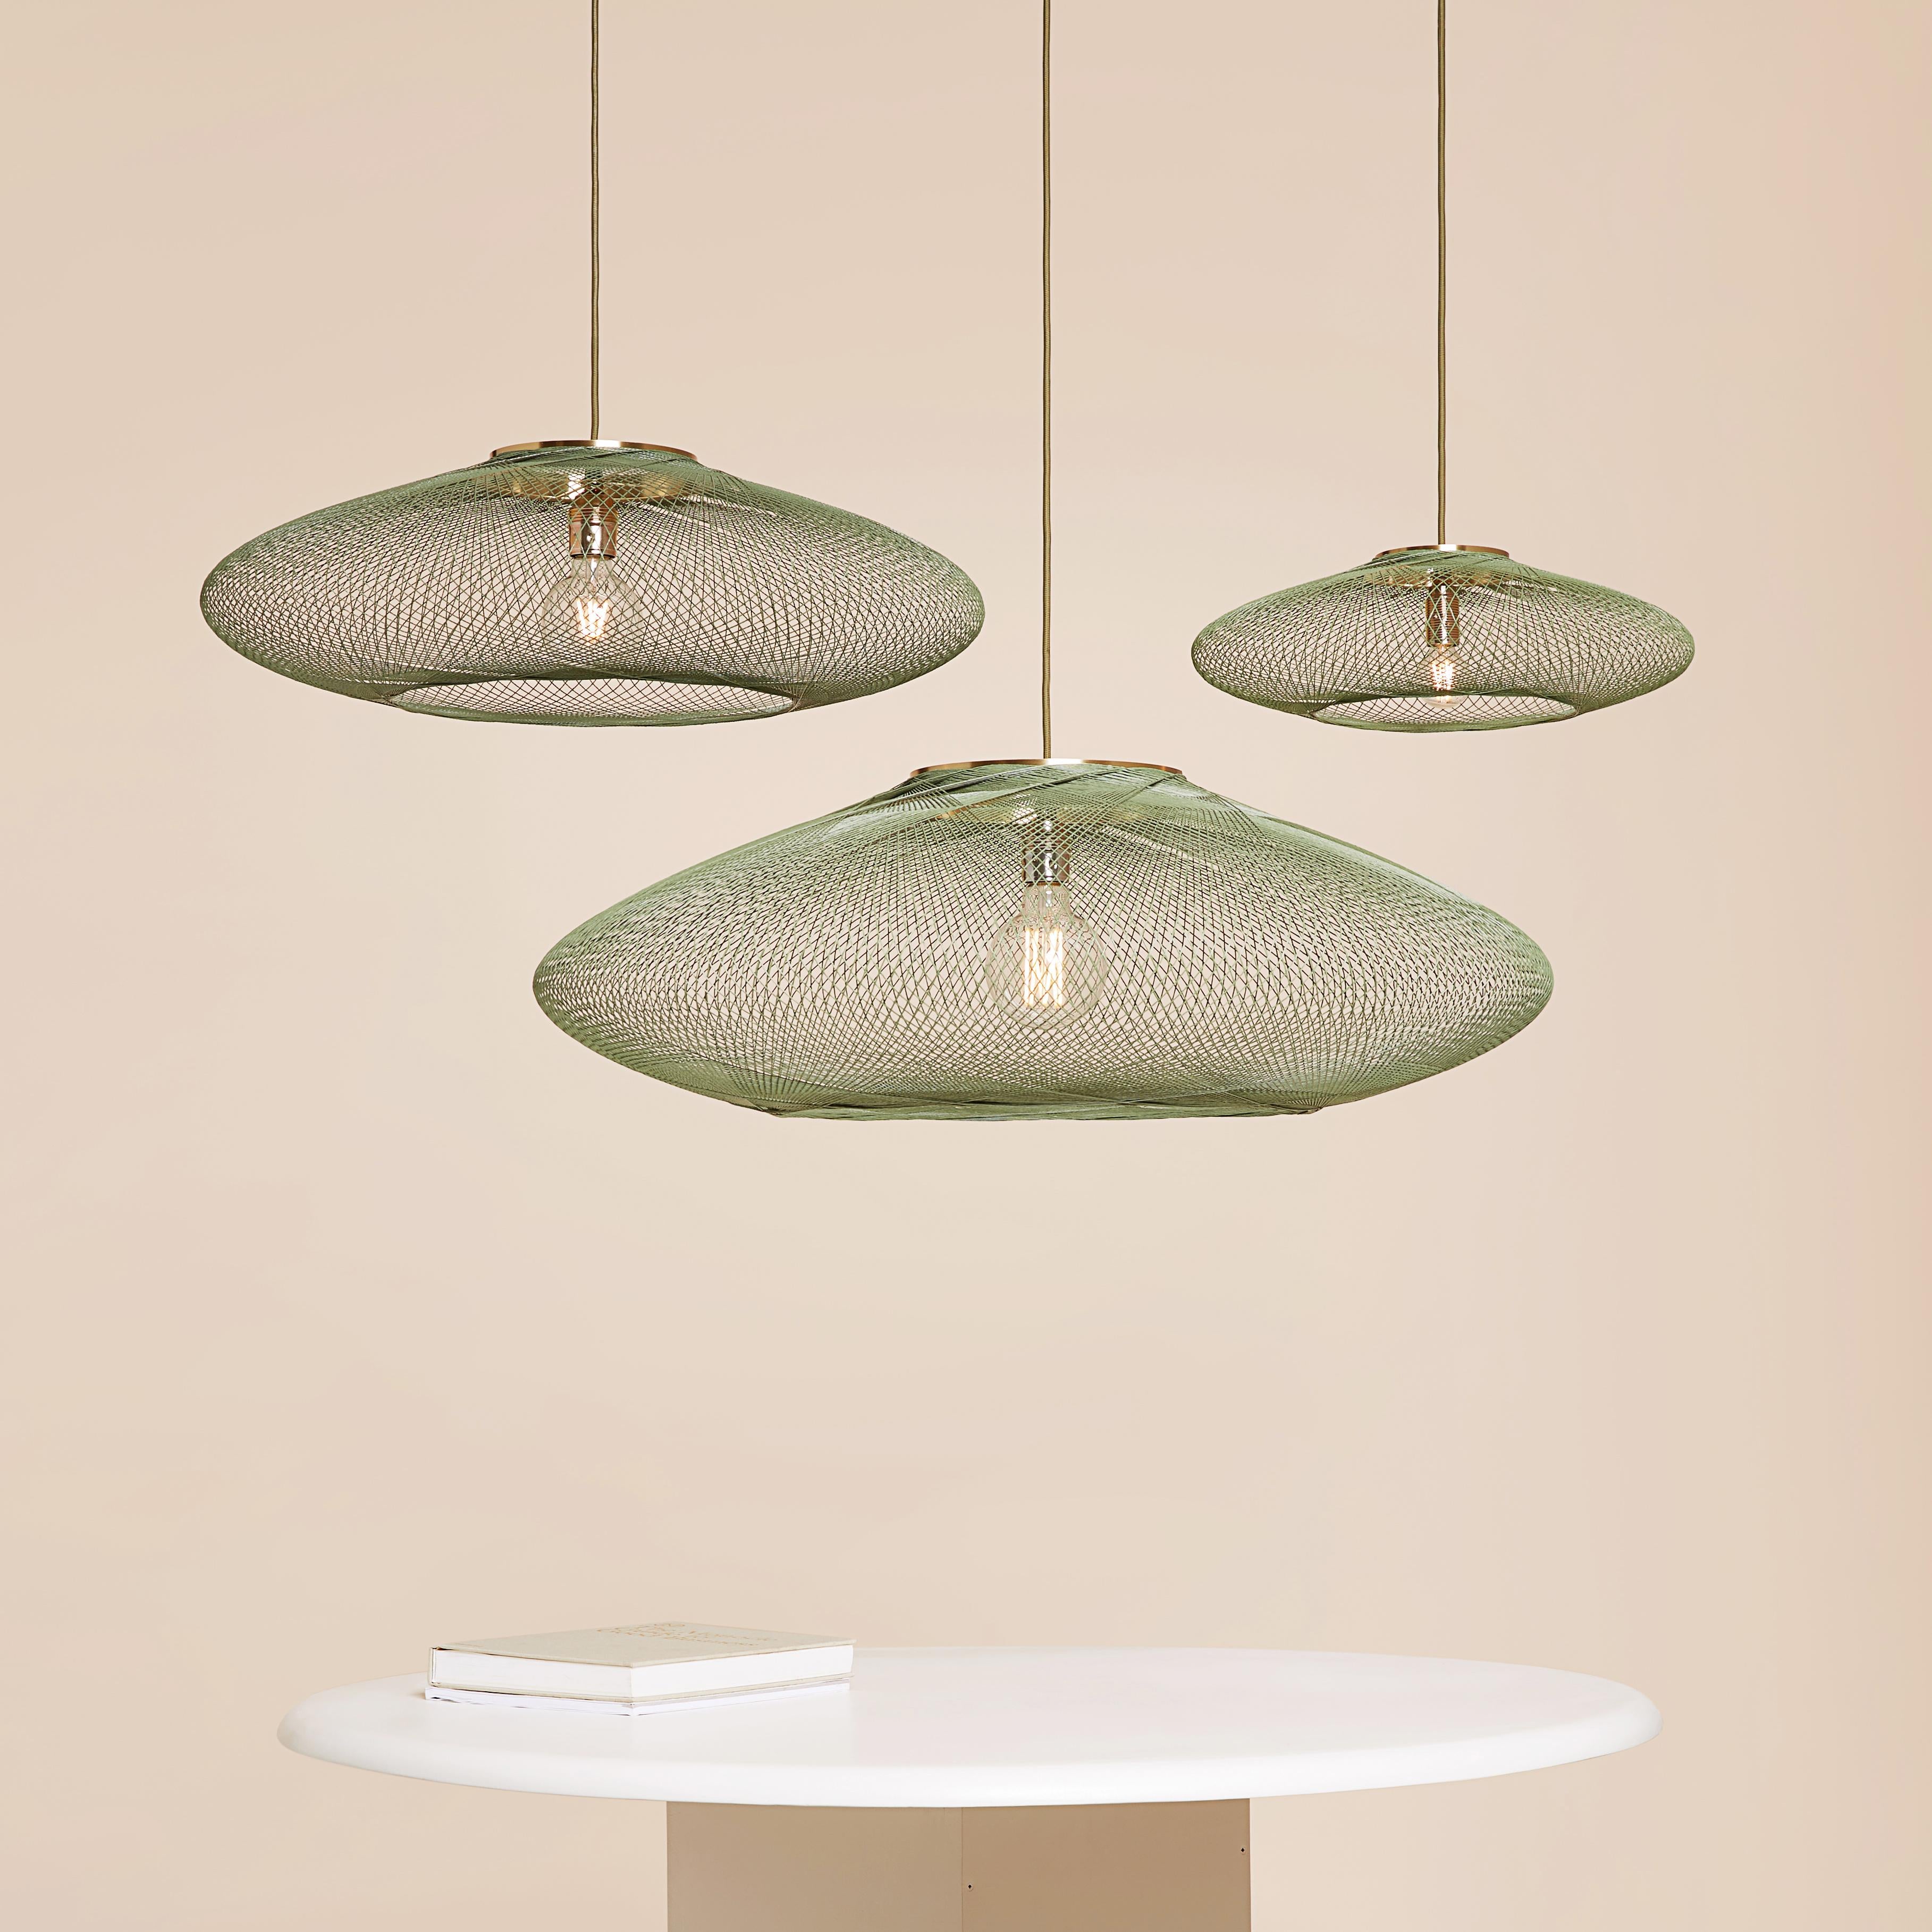 Large Moss Green UFO pendant lamp by Atelier Robotiq
Dimensions: D 80 x H 24 cm
Materials: Resin-impregnated industrial fiber, brass.
Available with holder in brass/ black coated stainless steel.
Available in different colors, 3 sizes, and in